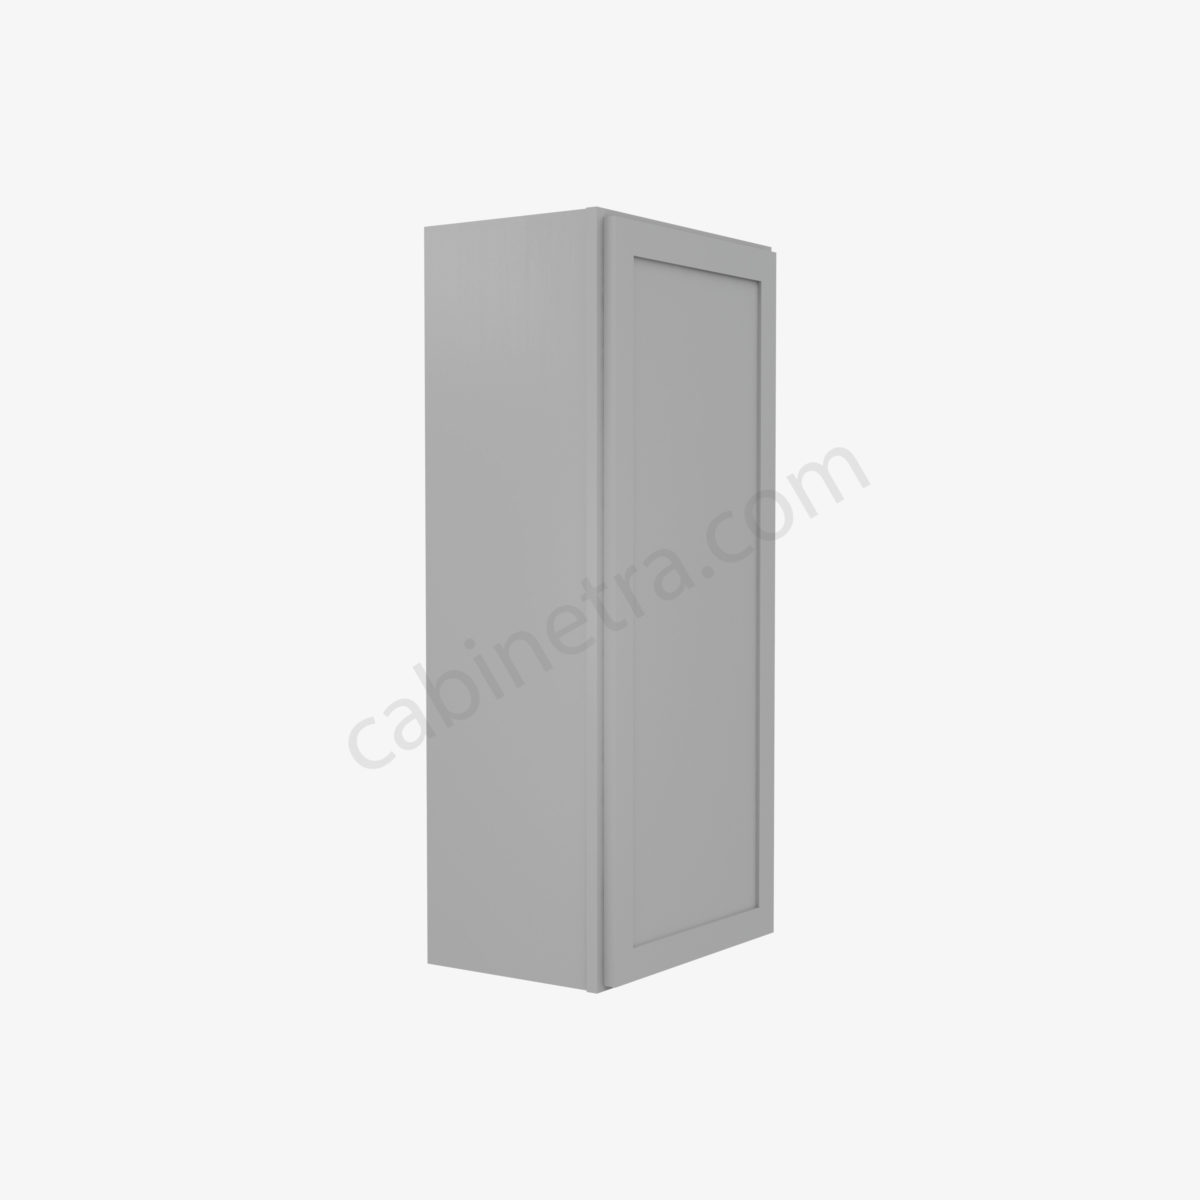 AB W1842 4 Forevermark Lait Gray Shaker Cabinetra scaled